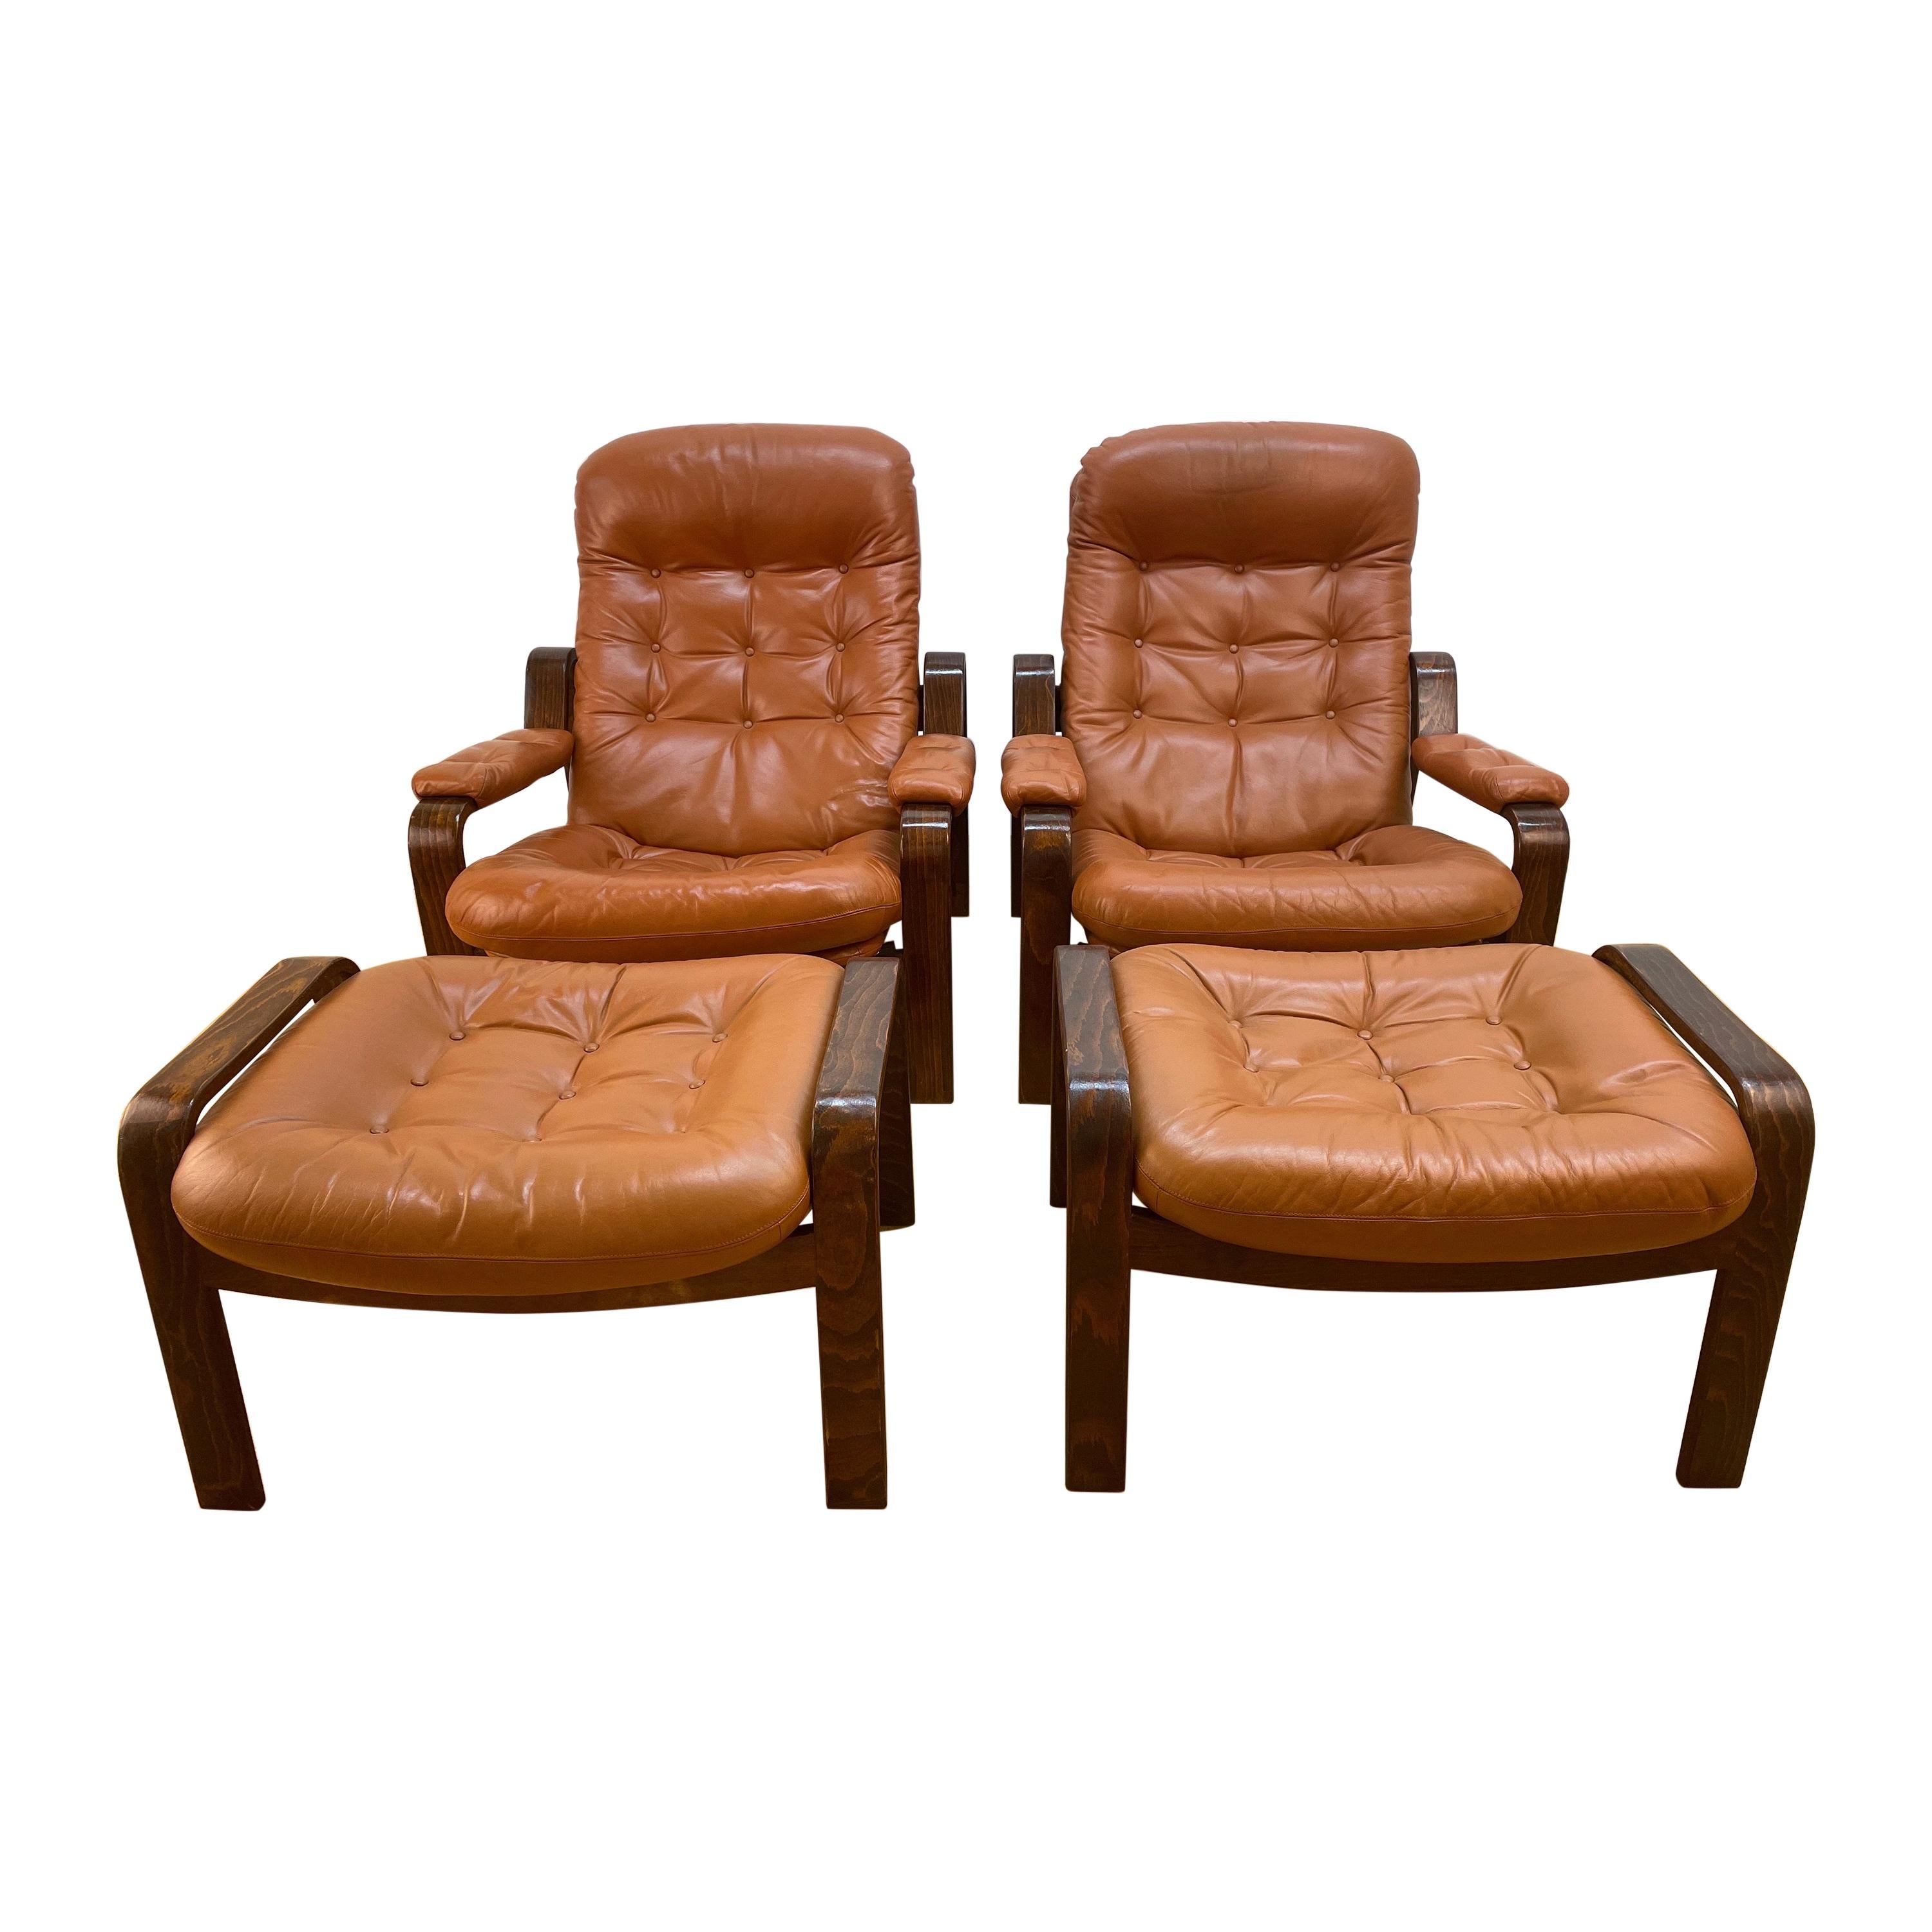 Pair of Swedish Modern Ergonomic Chairs with Matching Ottomen For Sale